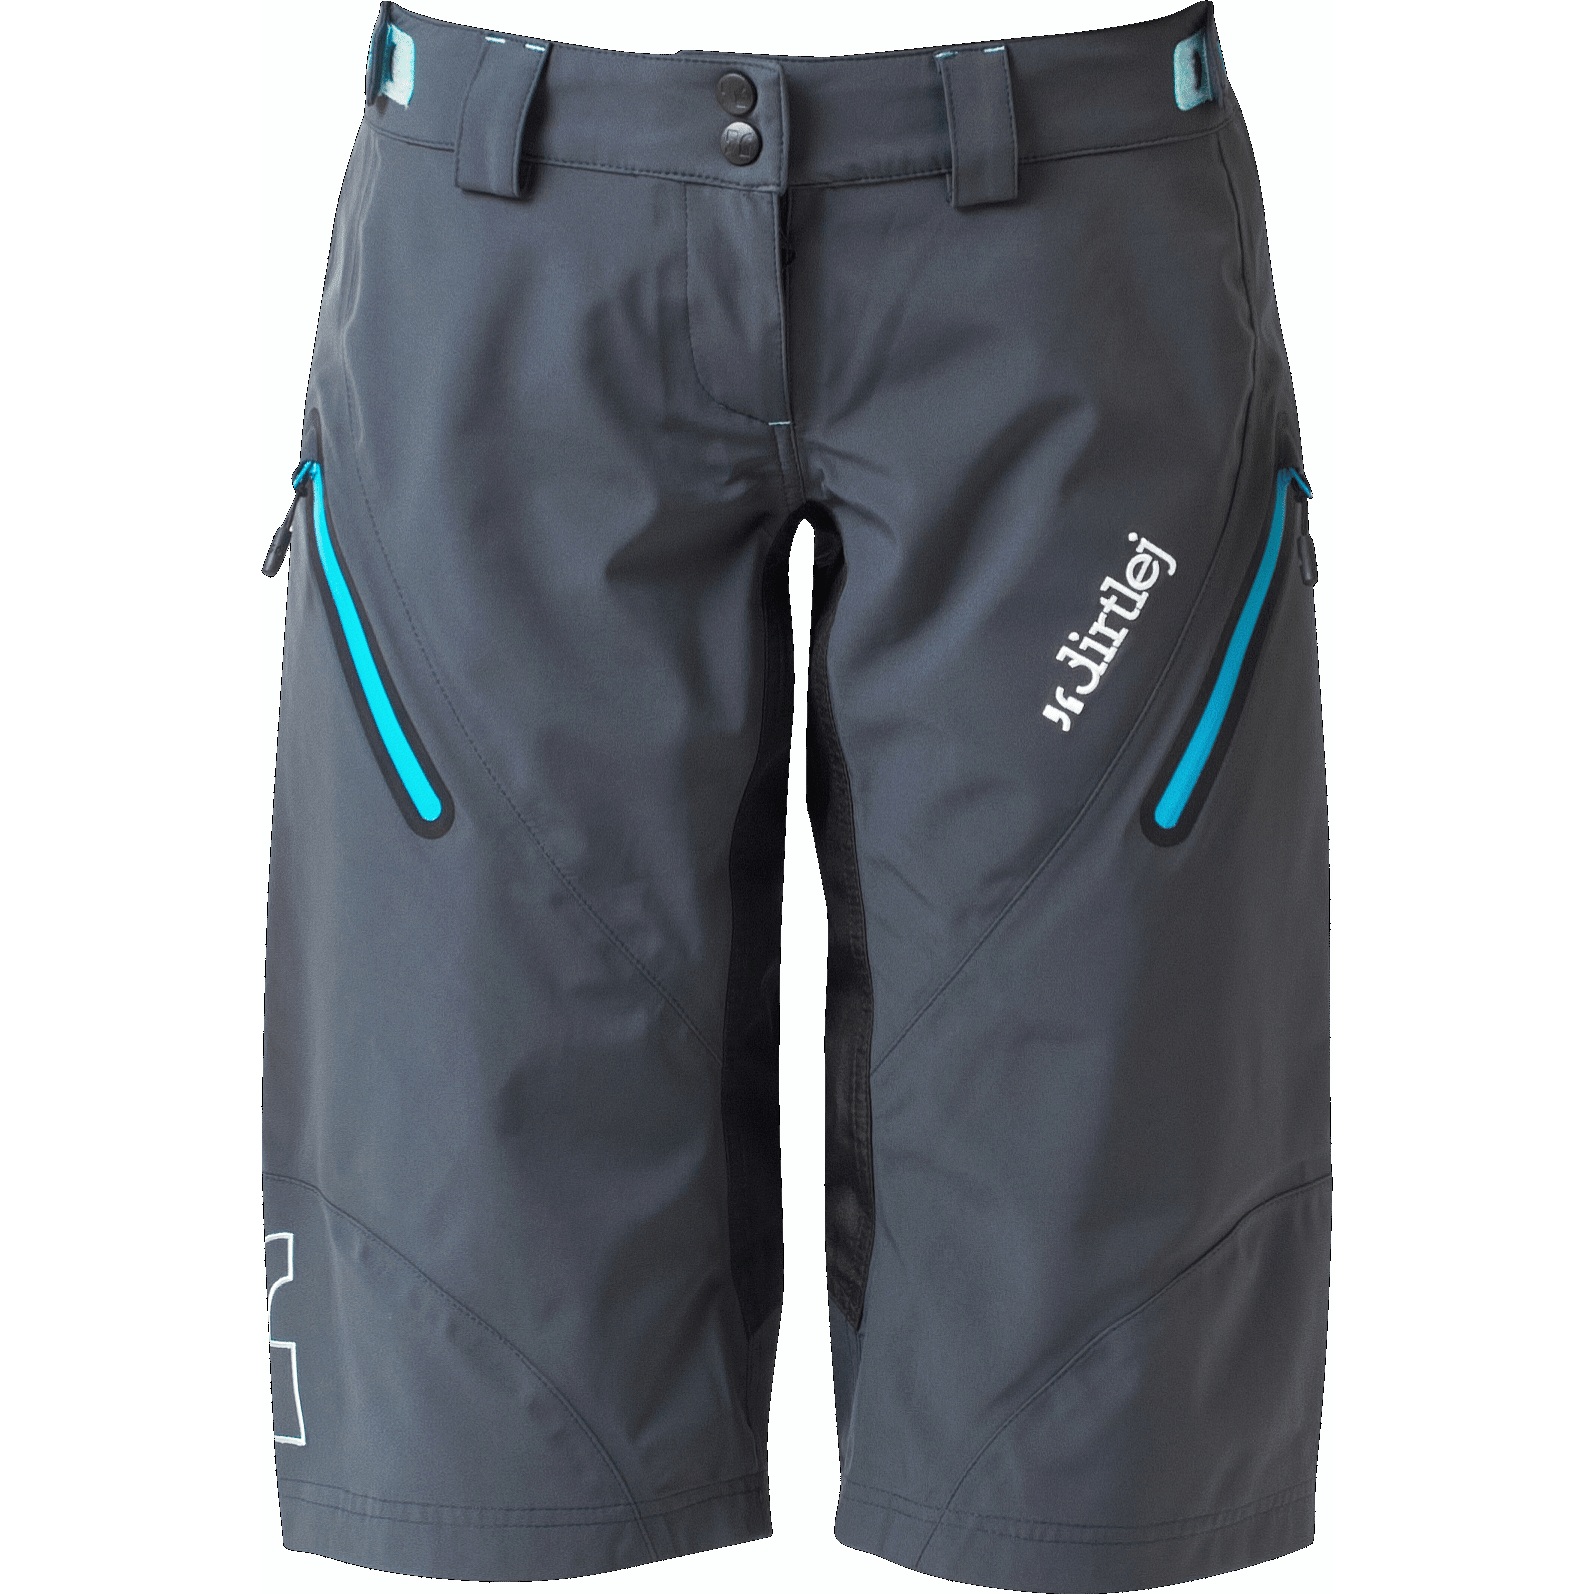 Image of Dirtlej Trailscout Waterproof Women's MTB Shorts - steelblue/turquoise